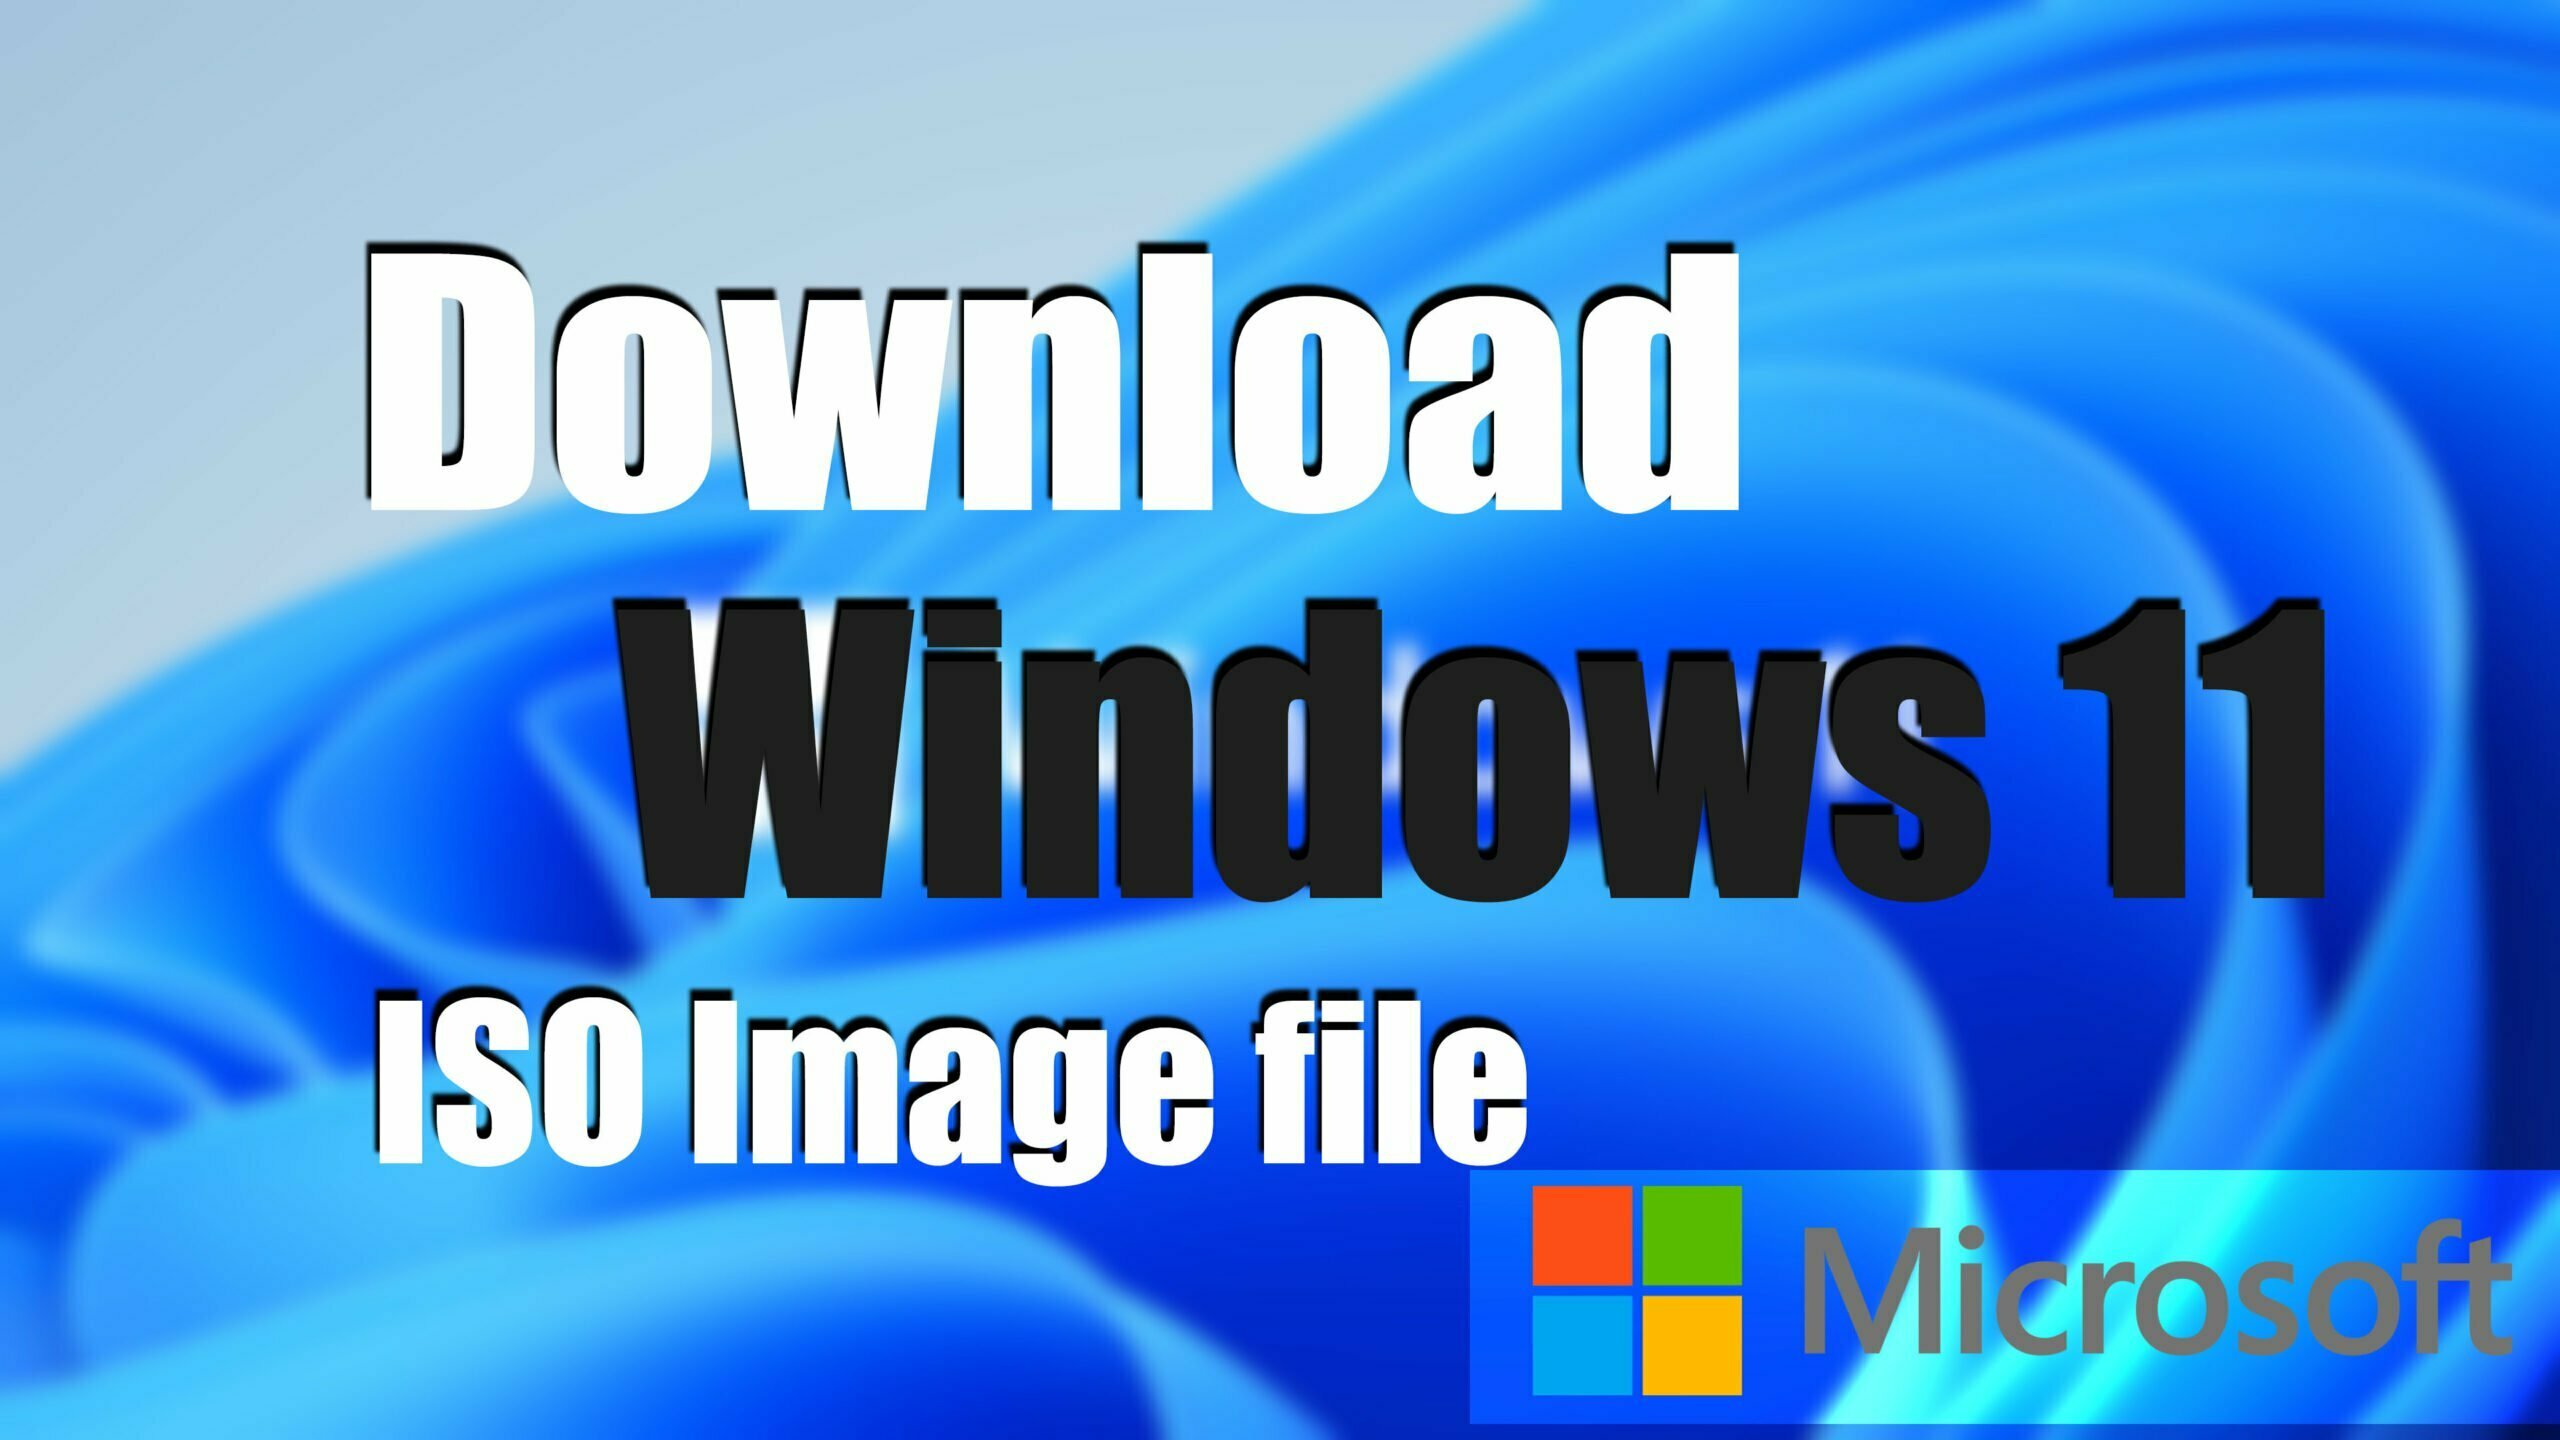 How to Download Windows 11 ISO image file from Microsoft Legally?